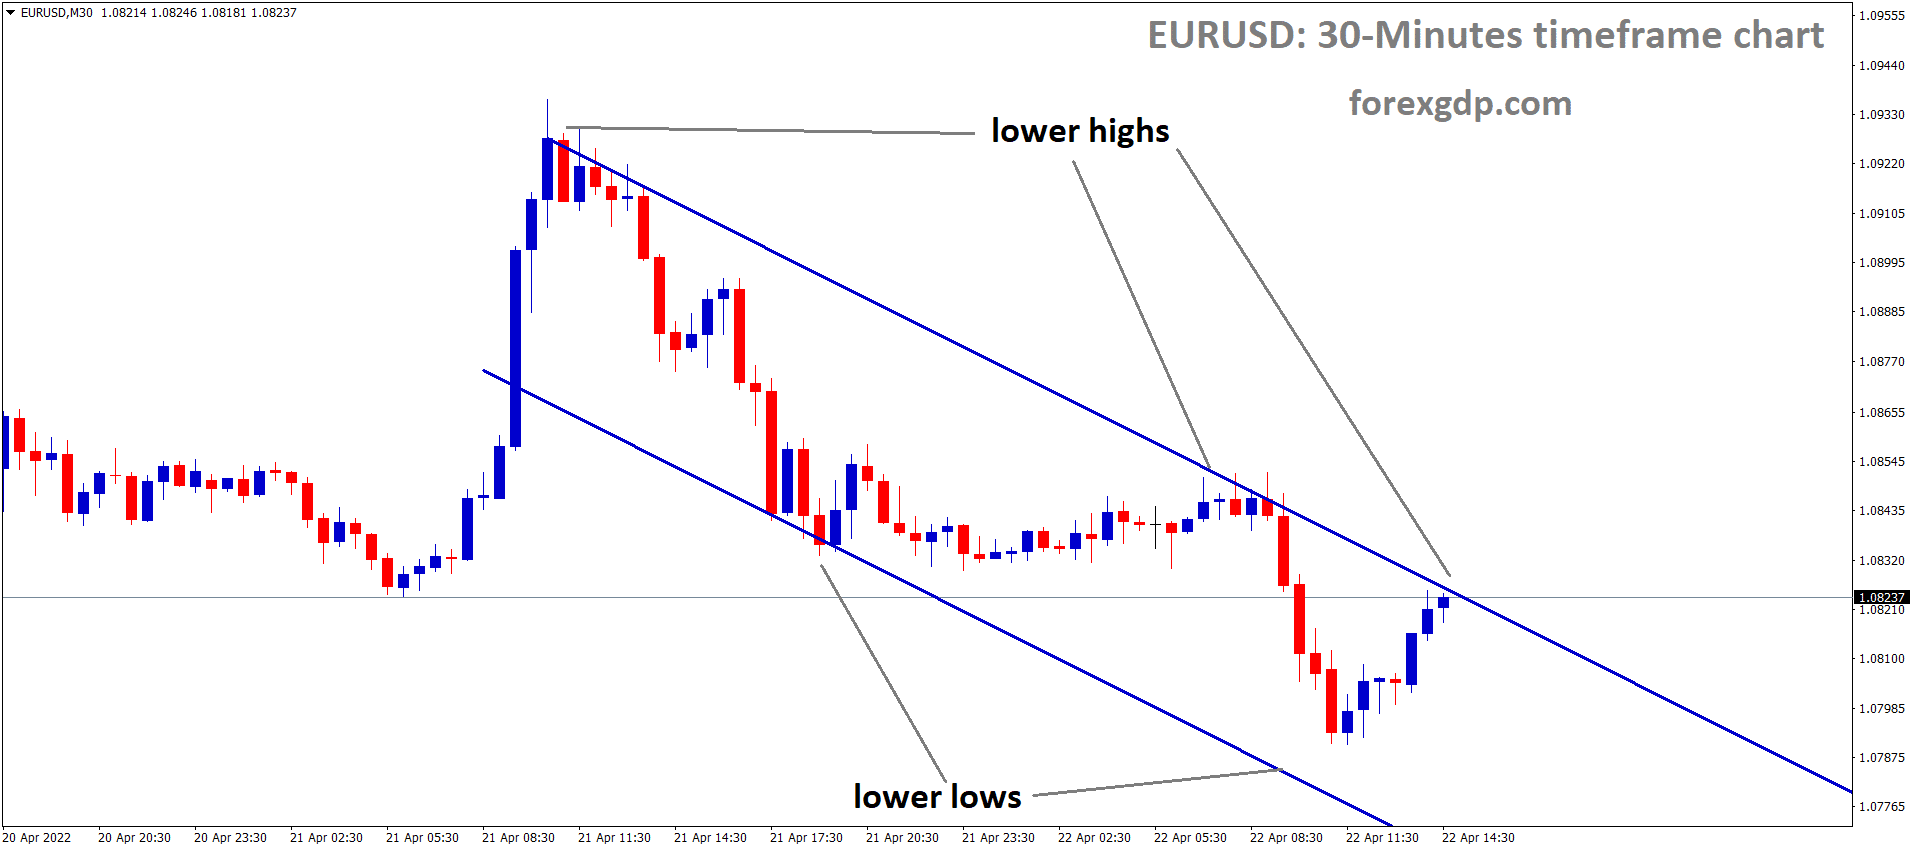 EURUSD M30 Time Frame Analysis Market is moving in the Descending channel and the Market has Reached the Lower high area of the Channel